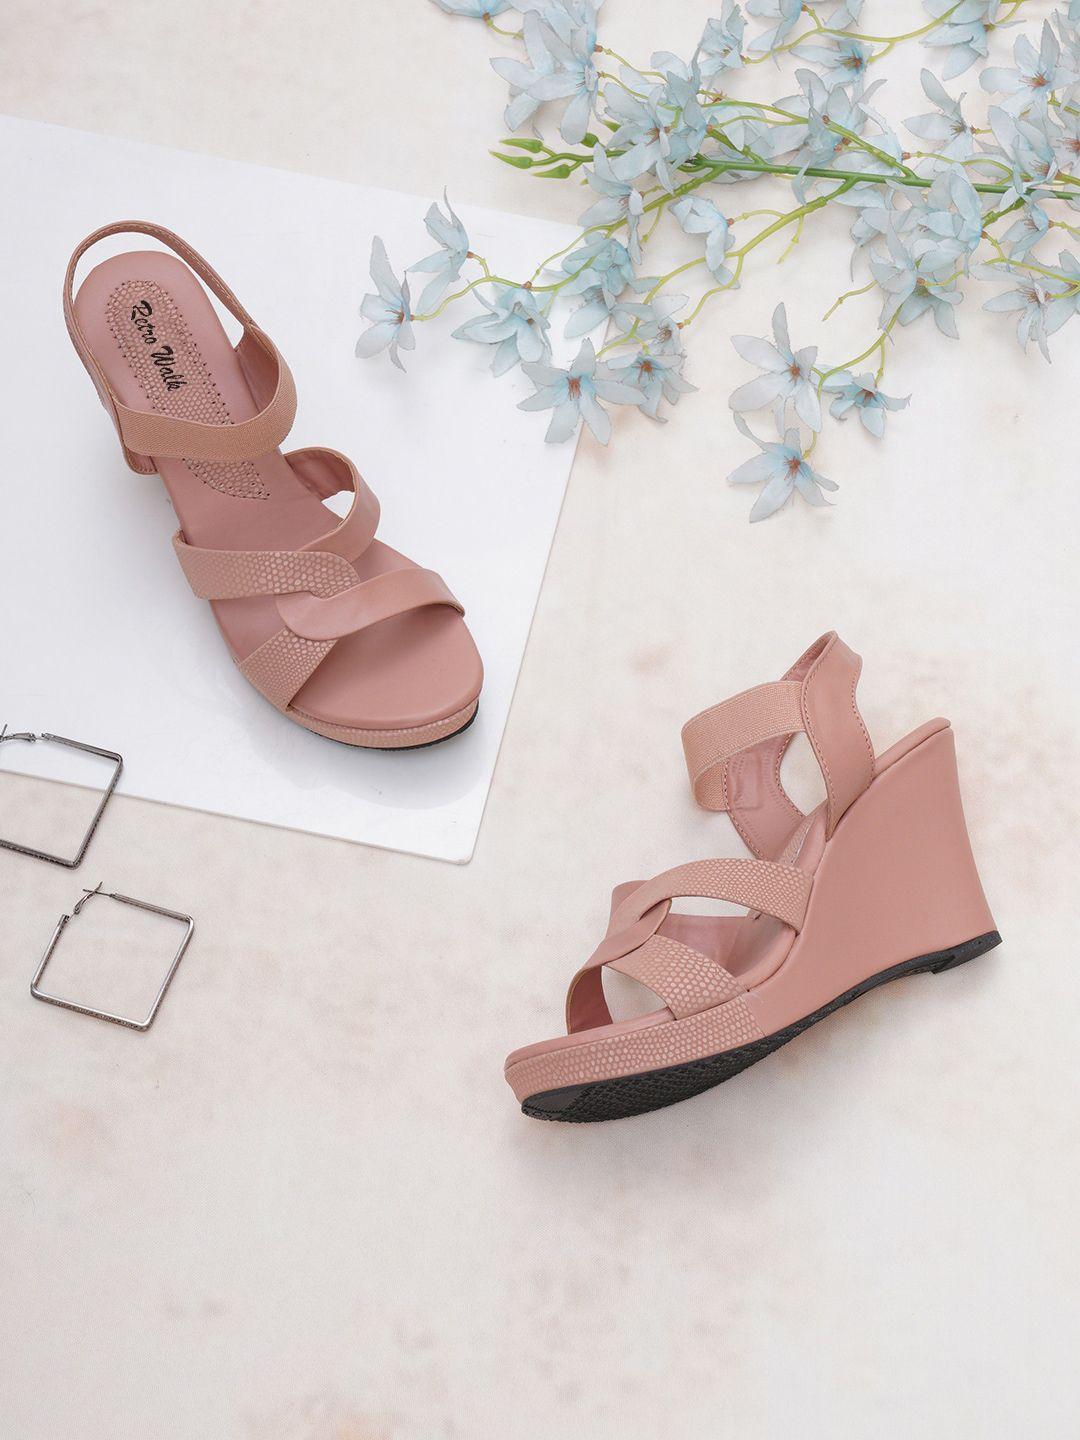 retro walk textured open toe wedges with backstrap